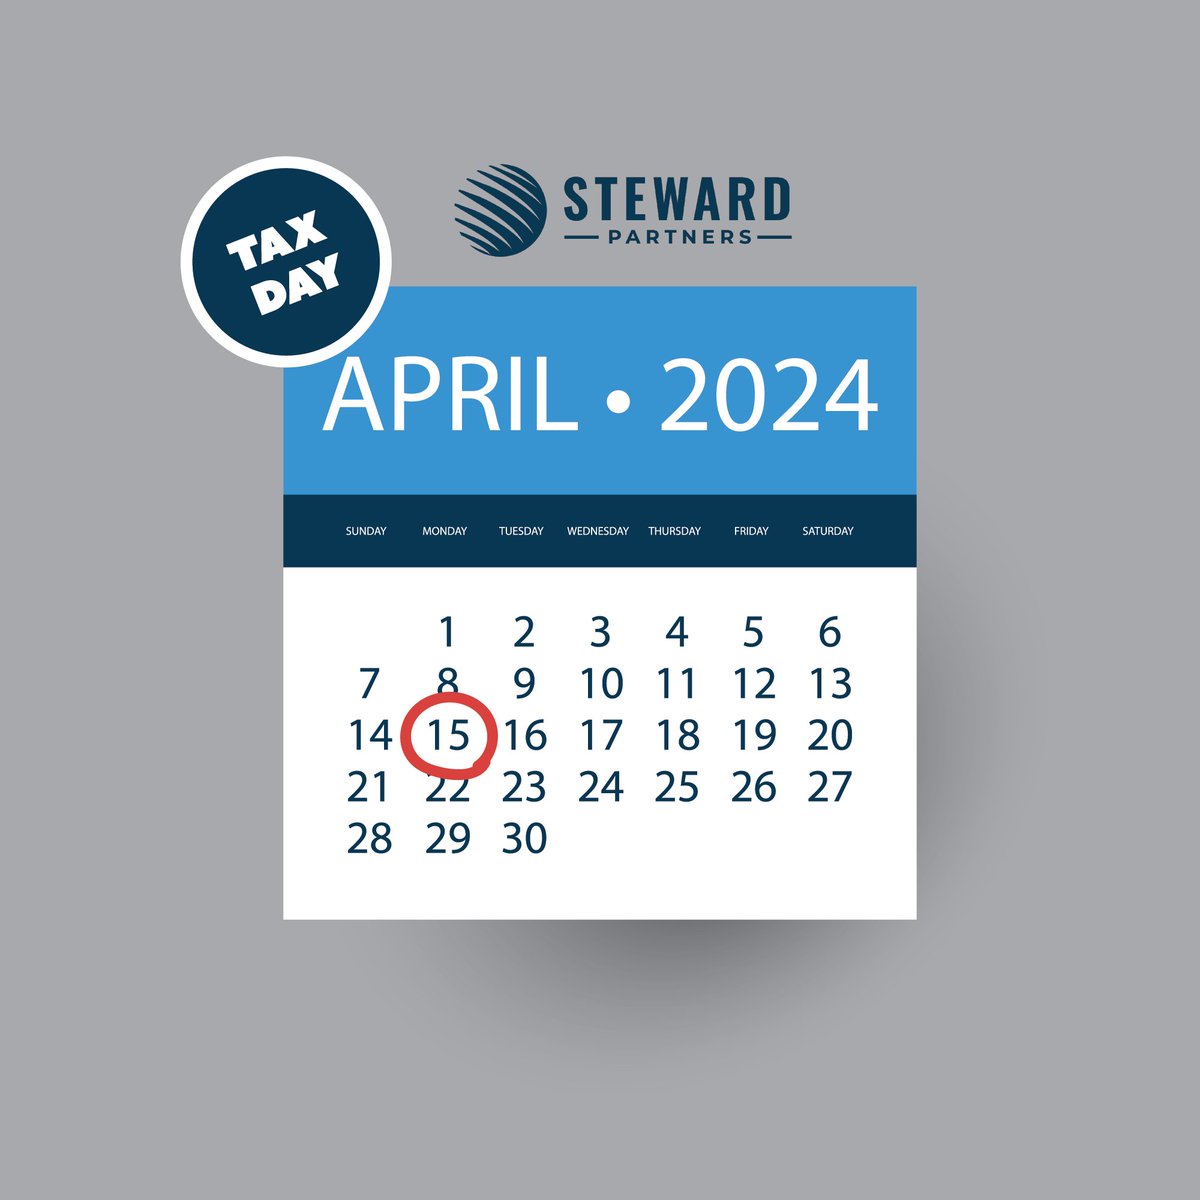 In the #UnitedStates, #TaxDay is the day on which individual #incometaxreturns are due to be submitted to the #federalgovernment. 
Most individual income #taxreturns for the 2023 tax year are due to the IRS on April 15, 2024.